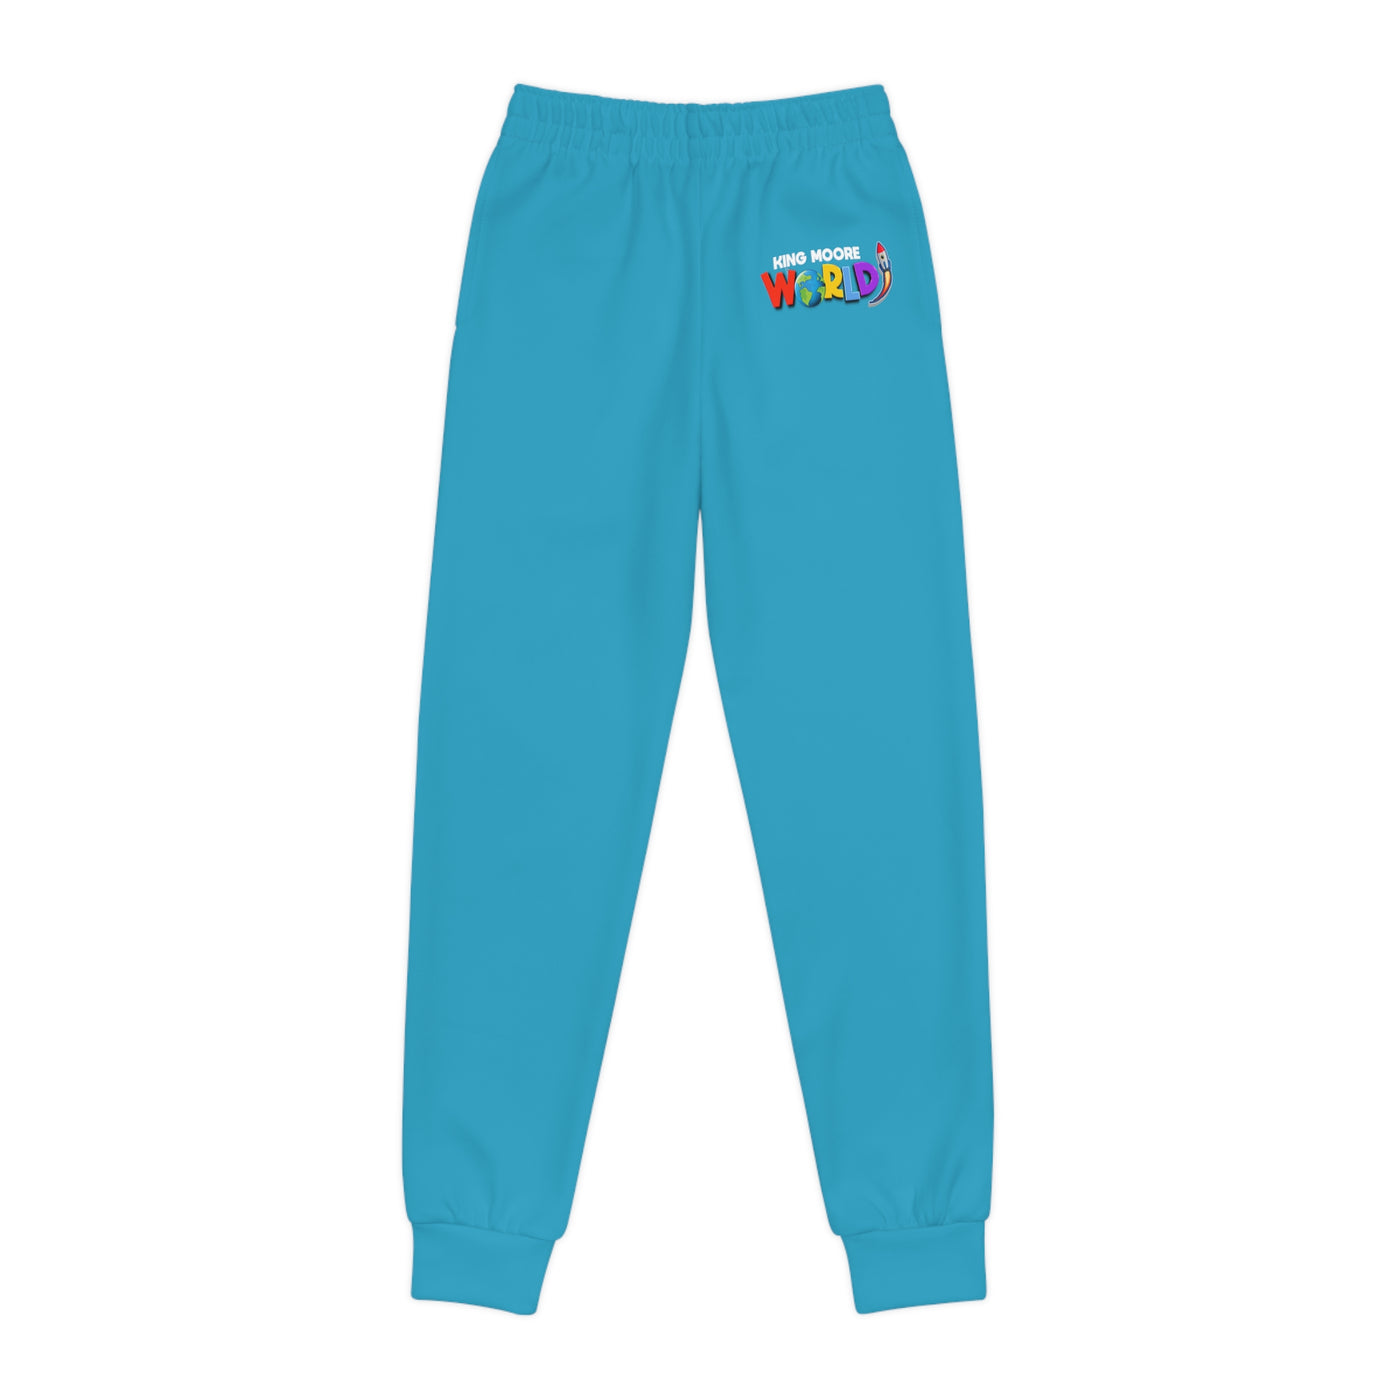 King Moore World Kids Joggers (Turquoise)